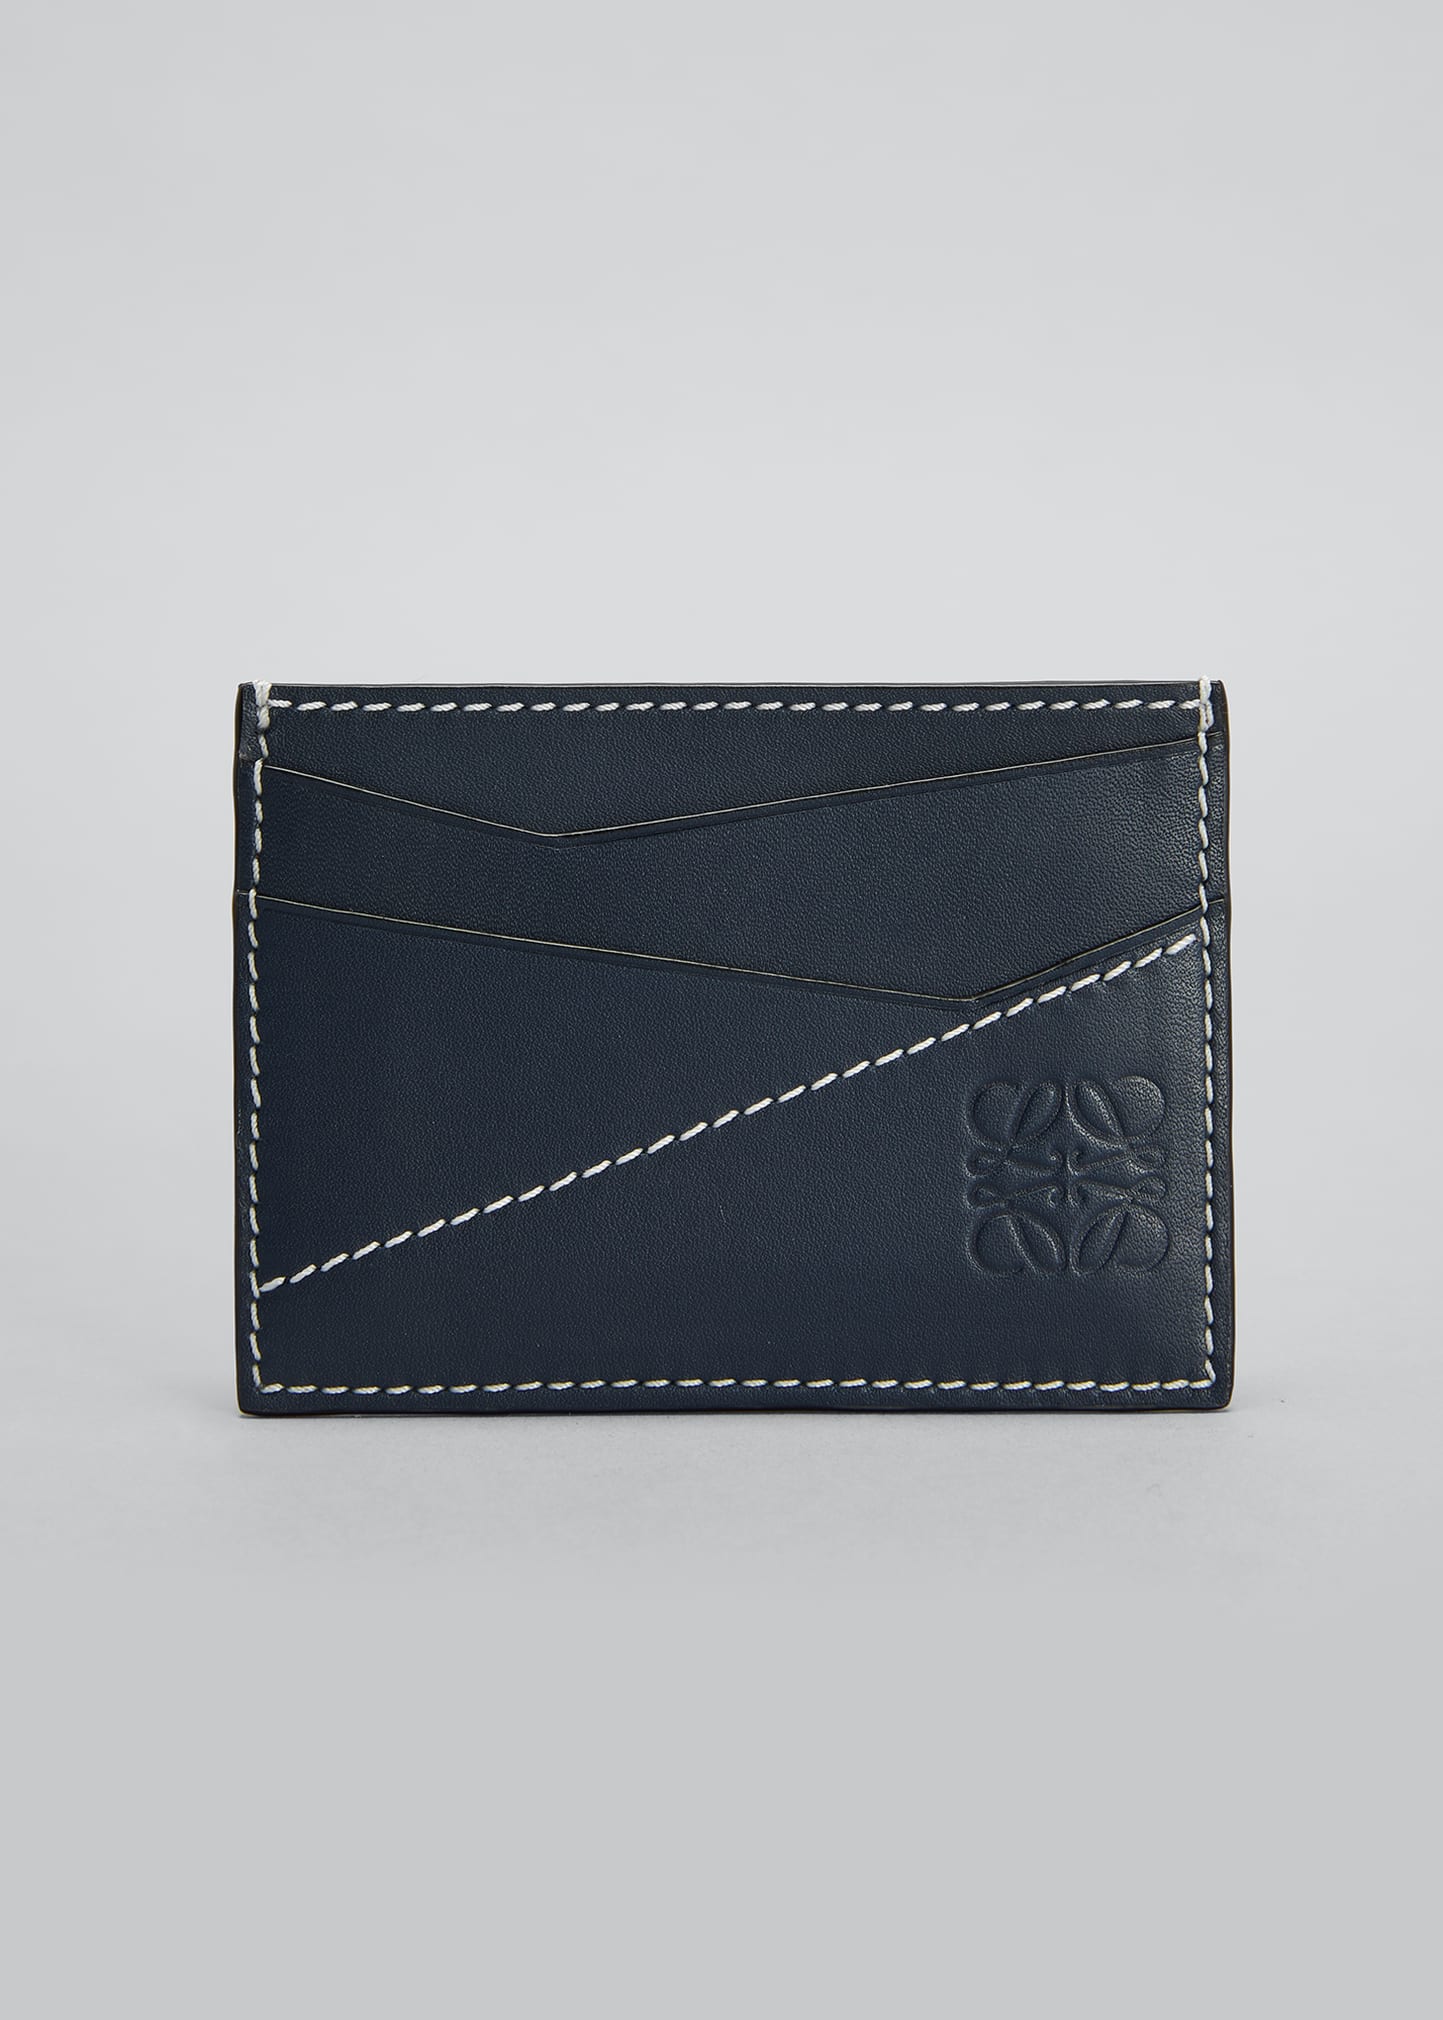 Loewe Men's Puzzle Stitched Leather Card Case In Ocean